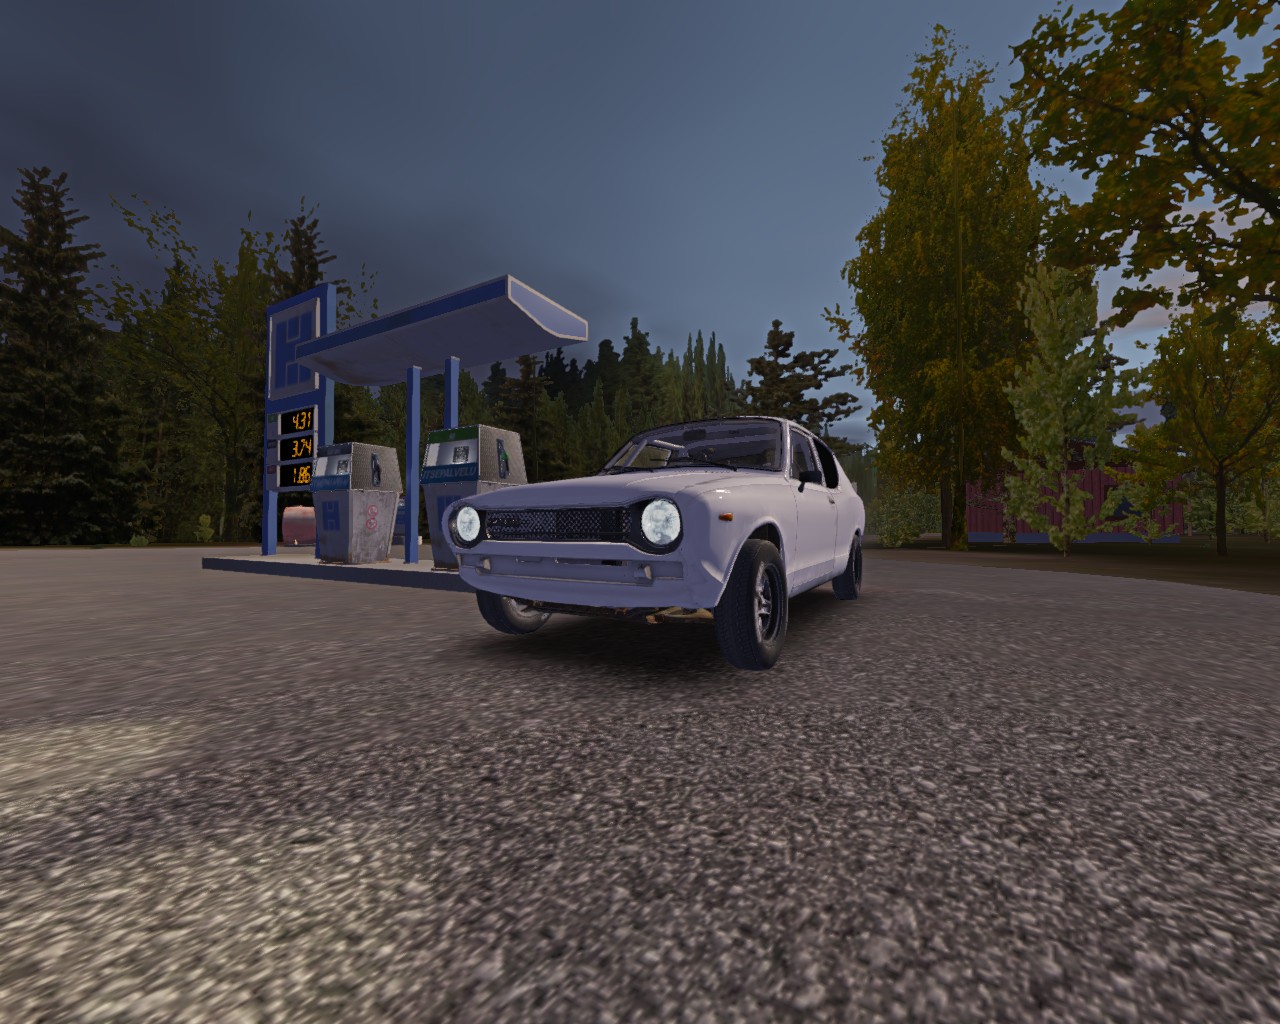 My Summer Car: SaveGame (The storyline is untouched, 9999999 marks, the satsuma is configured and ready to drive fast)